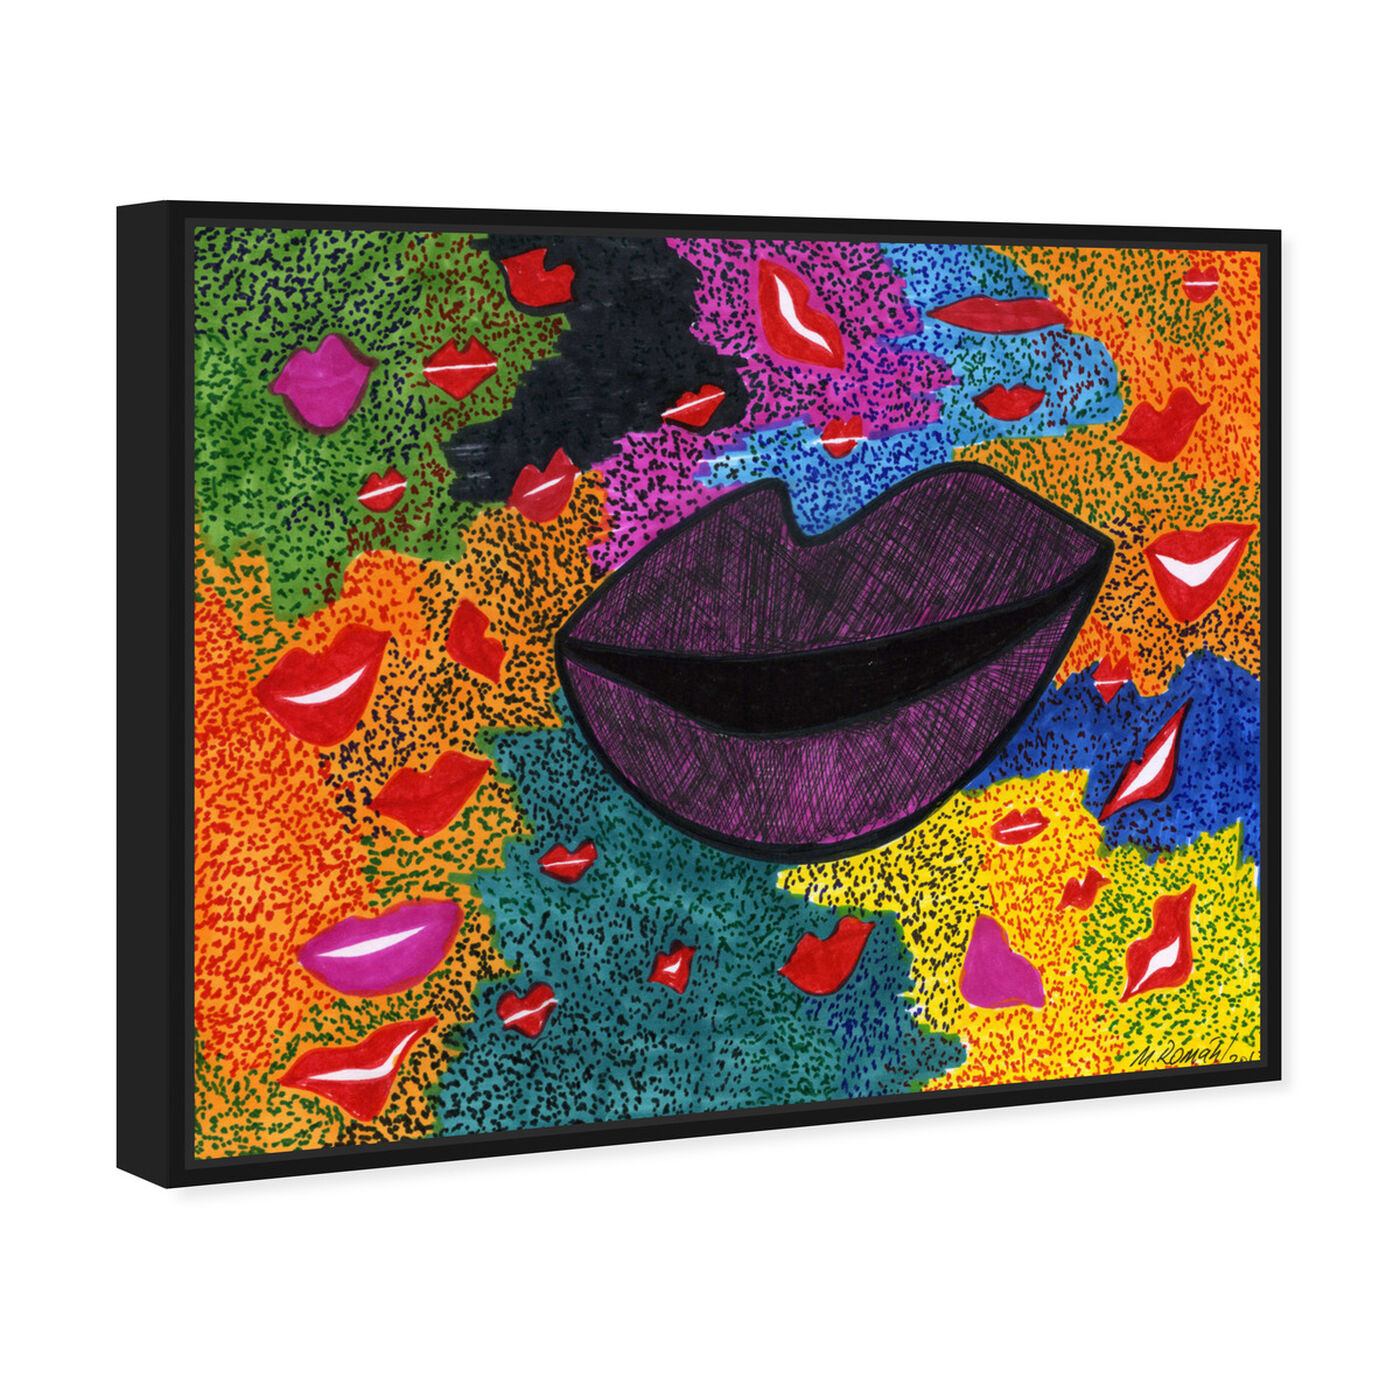 Angled view of Laughter featuring fashion and glam and lips art.